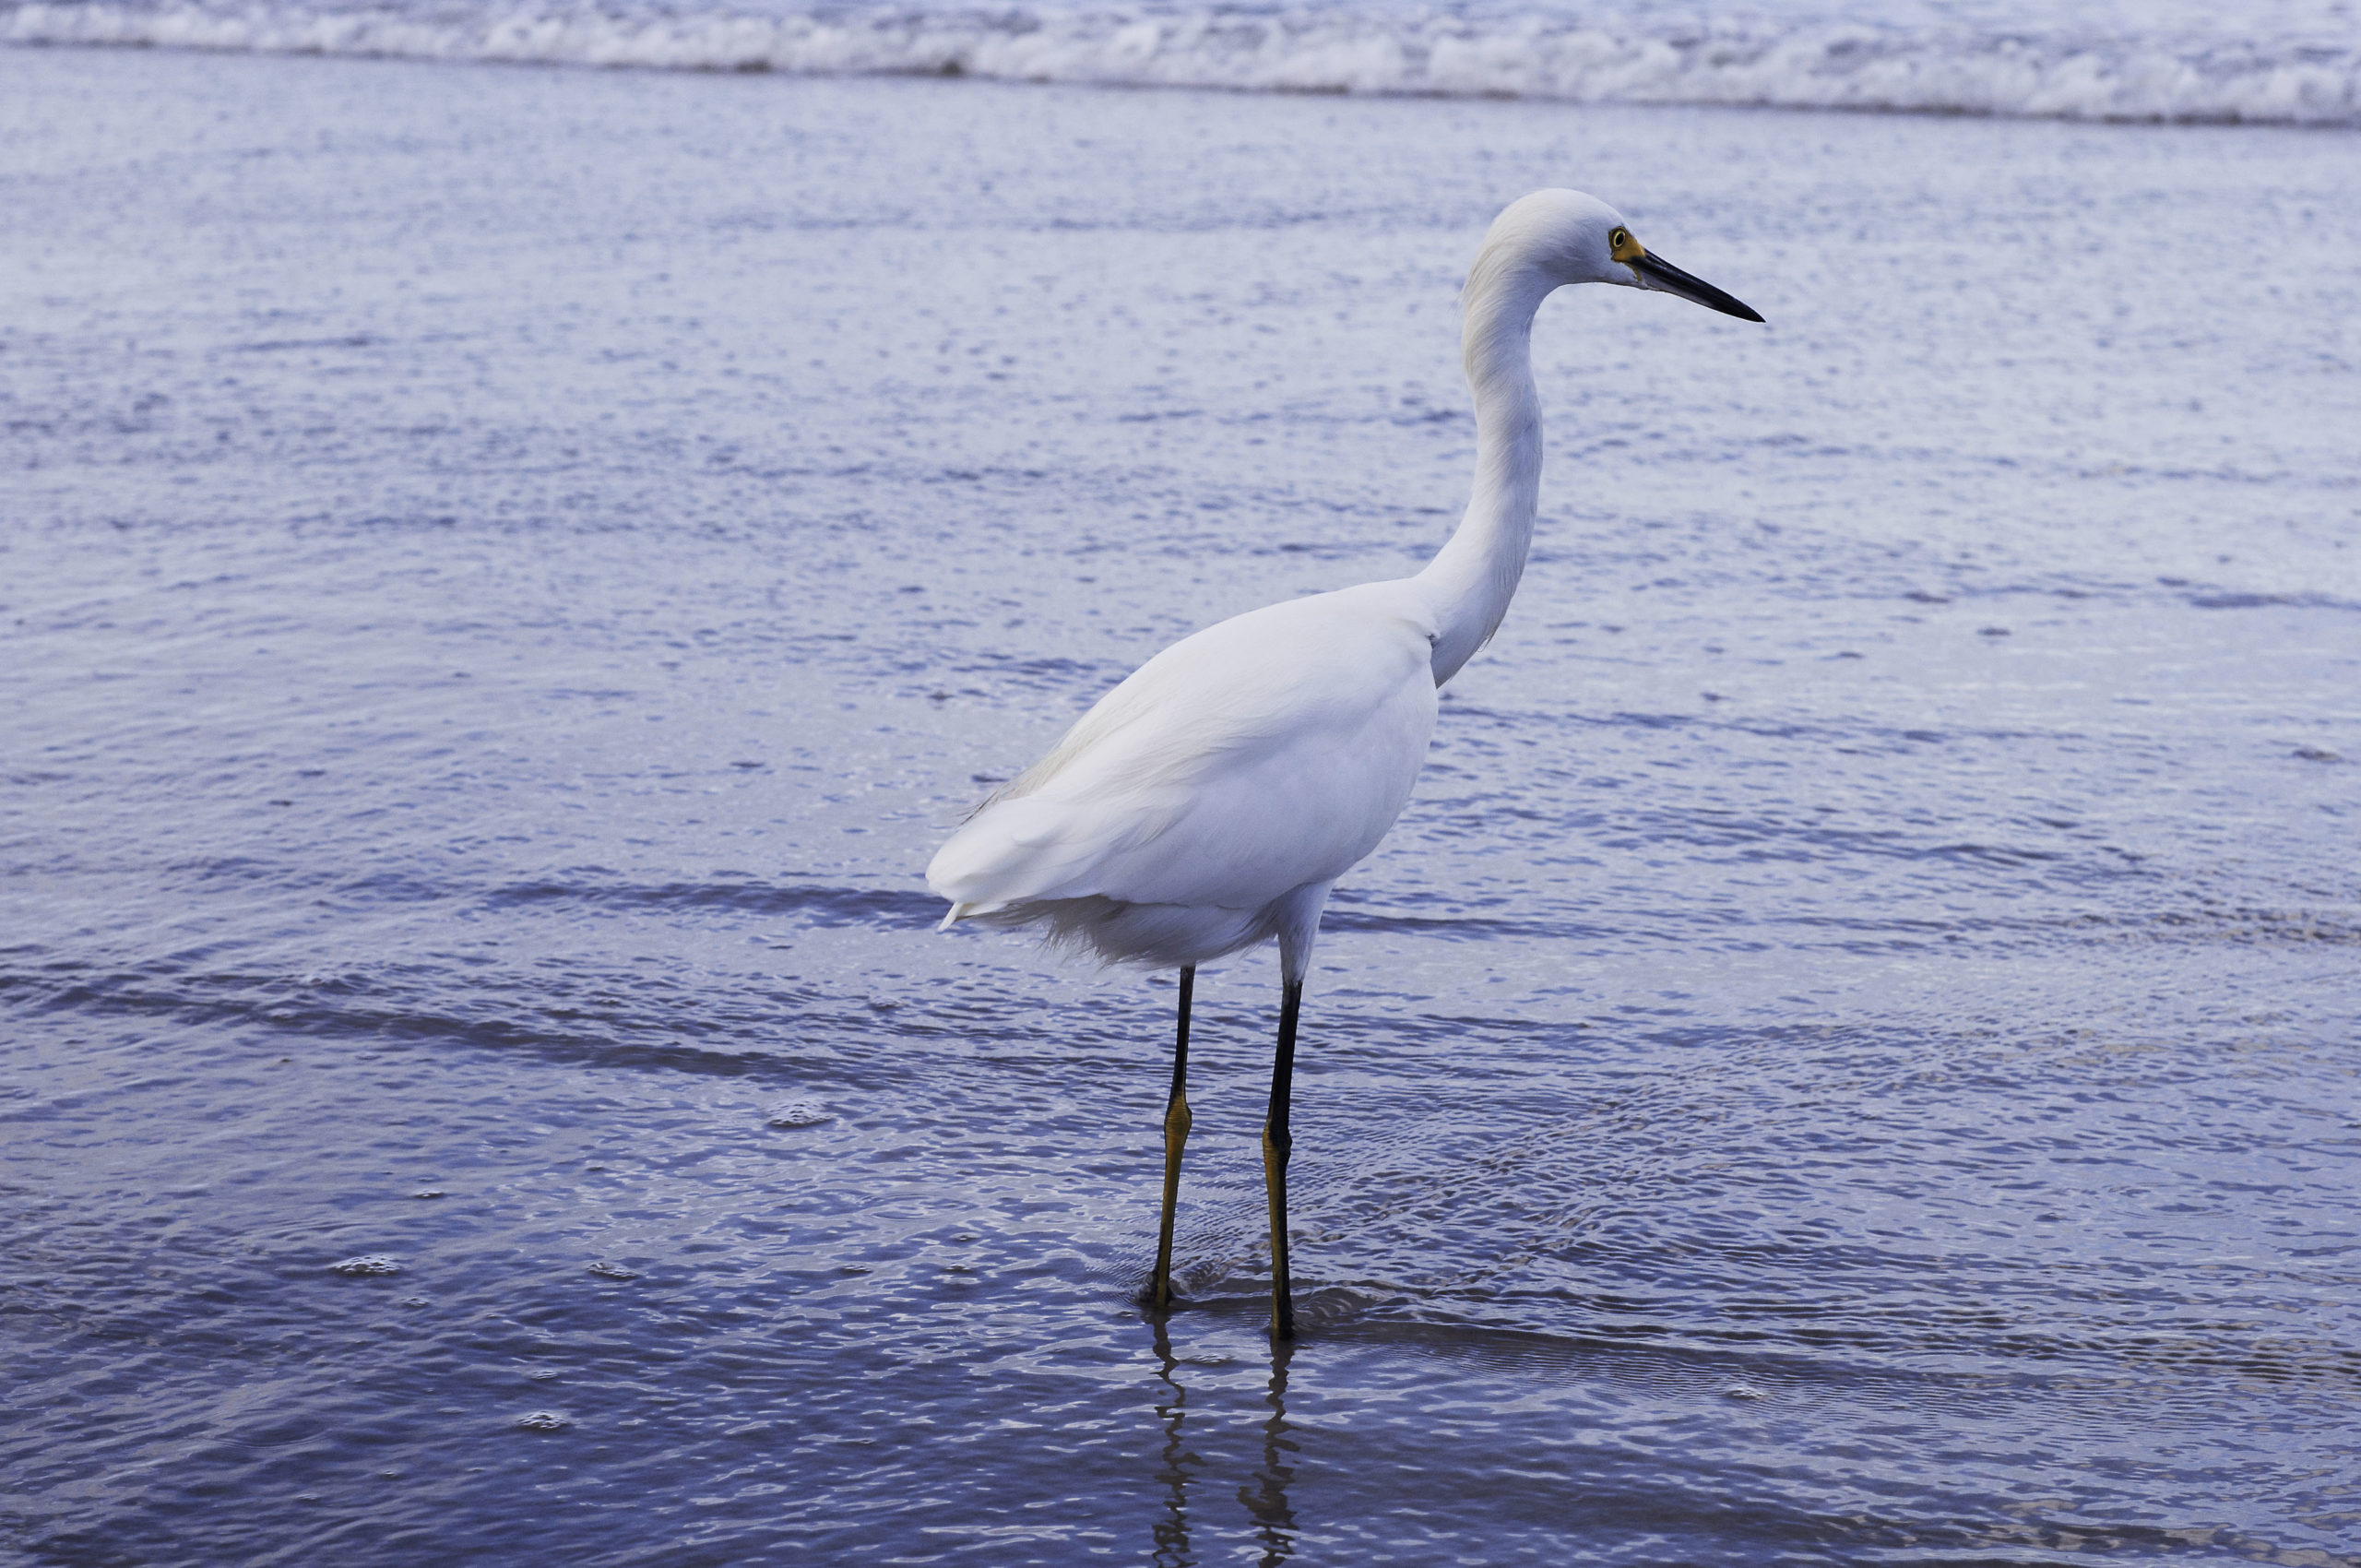 close up profile view of lone bird standing in shallow water on beach